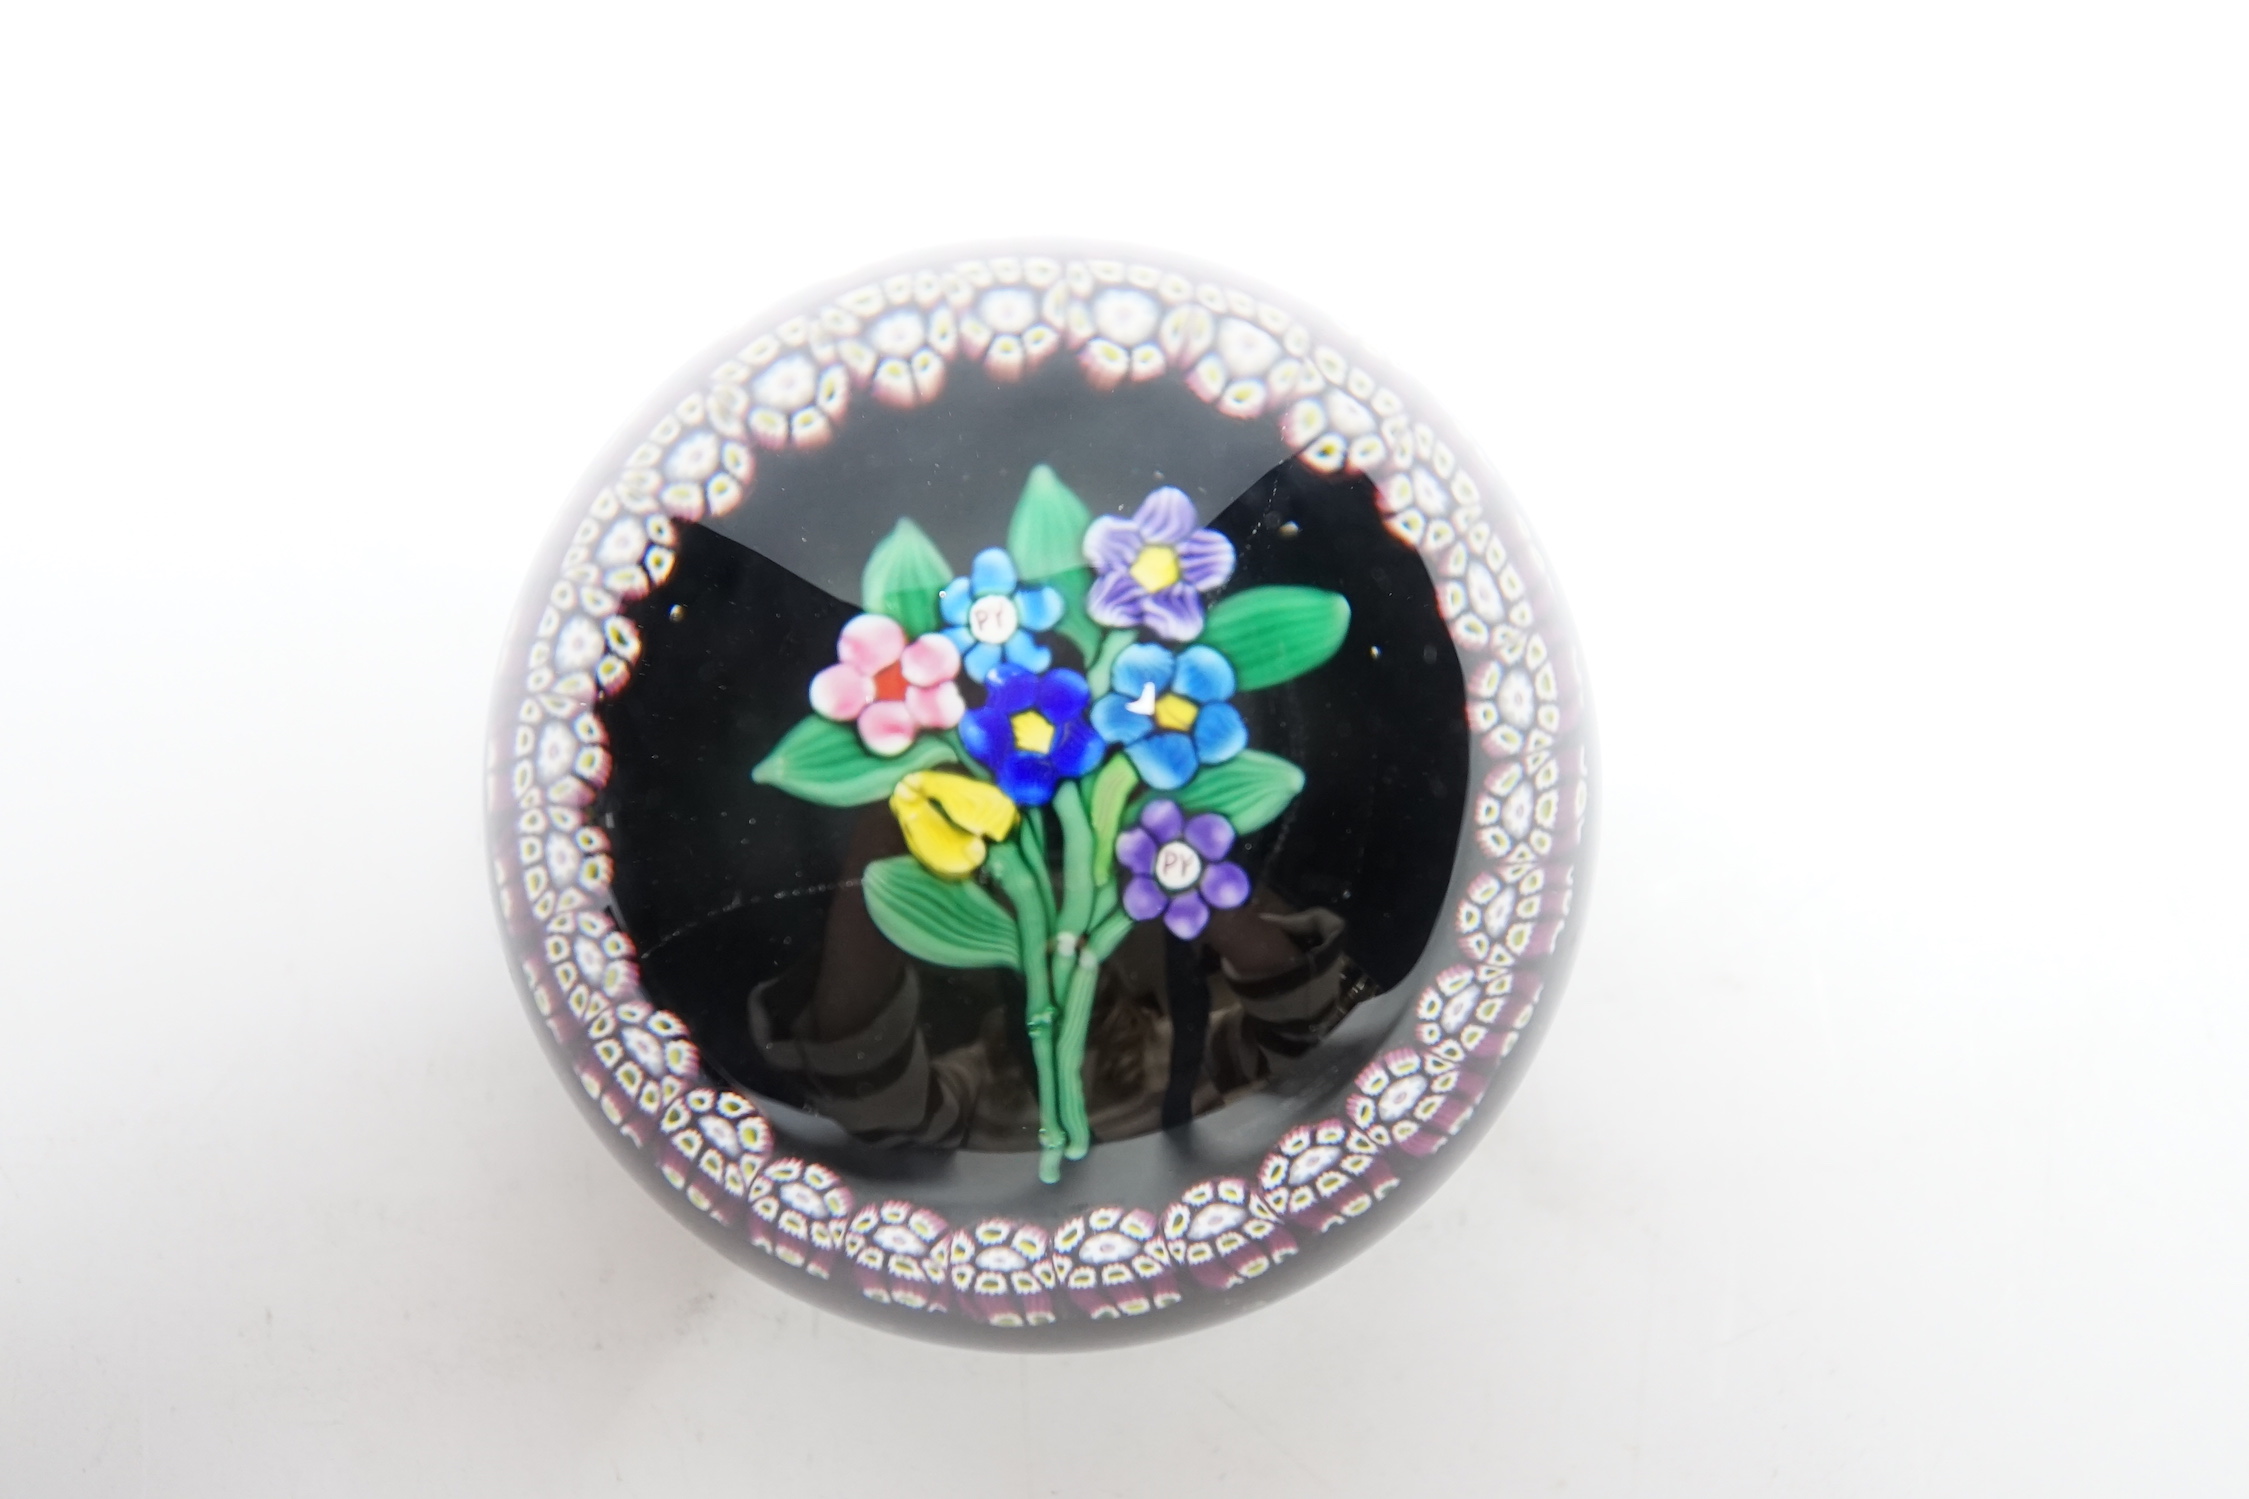 A rare Paul Ysart ‘small flower bouquet’ paperweight with double ‘PY’ cane, Caithness period, CG paper label to base, 7.5cm